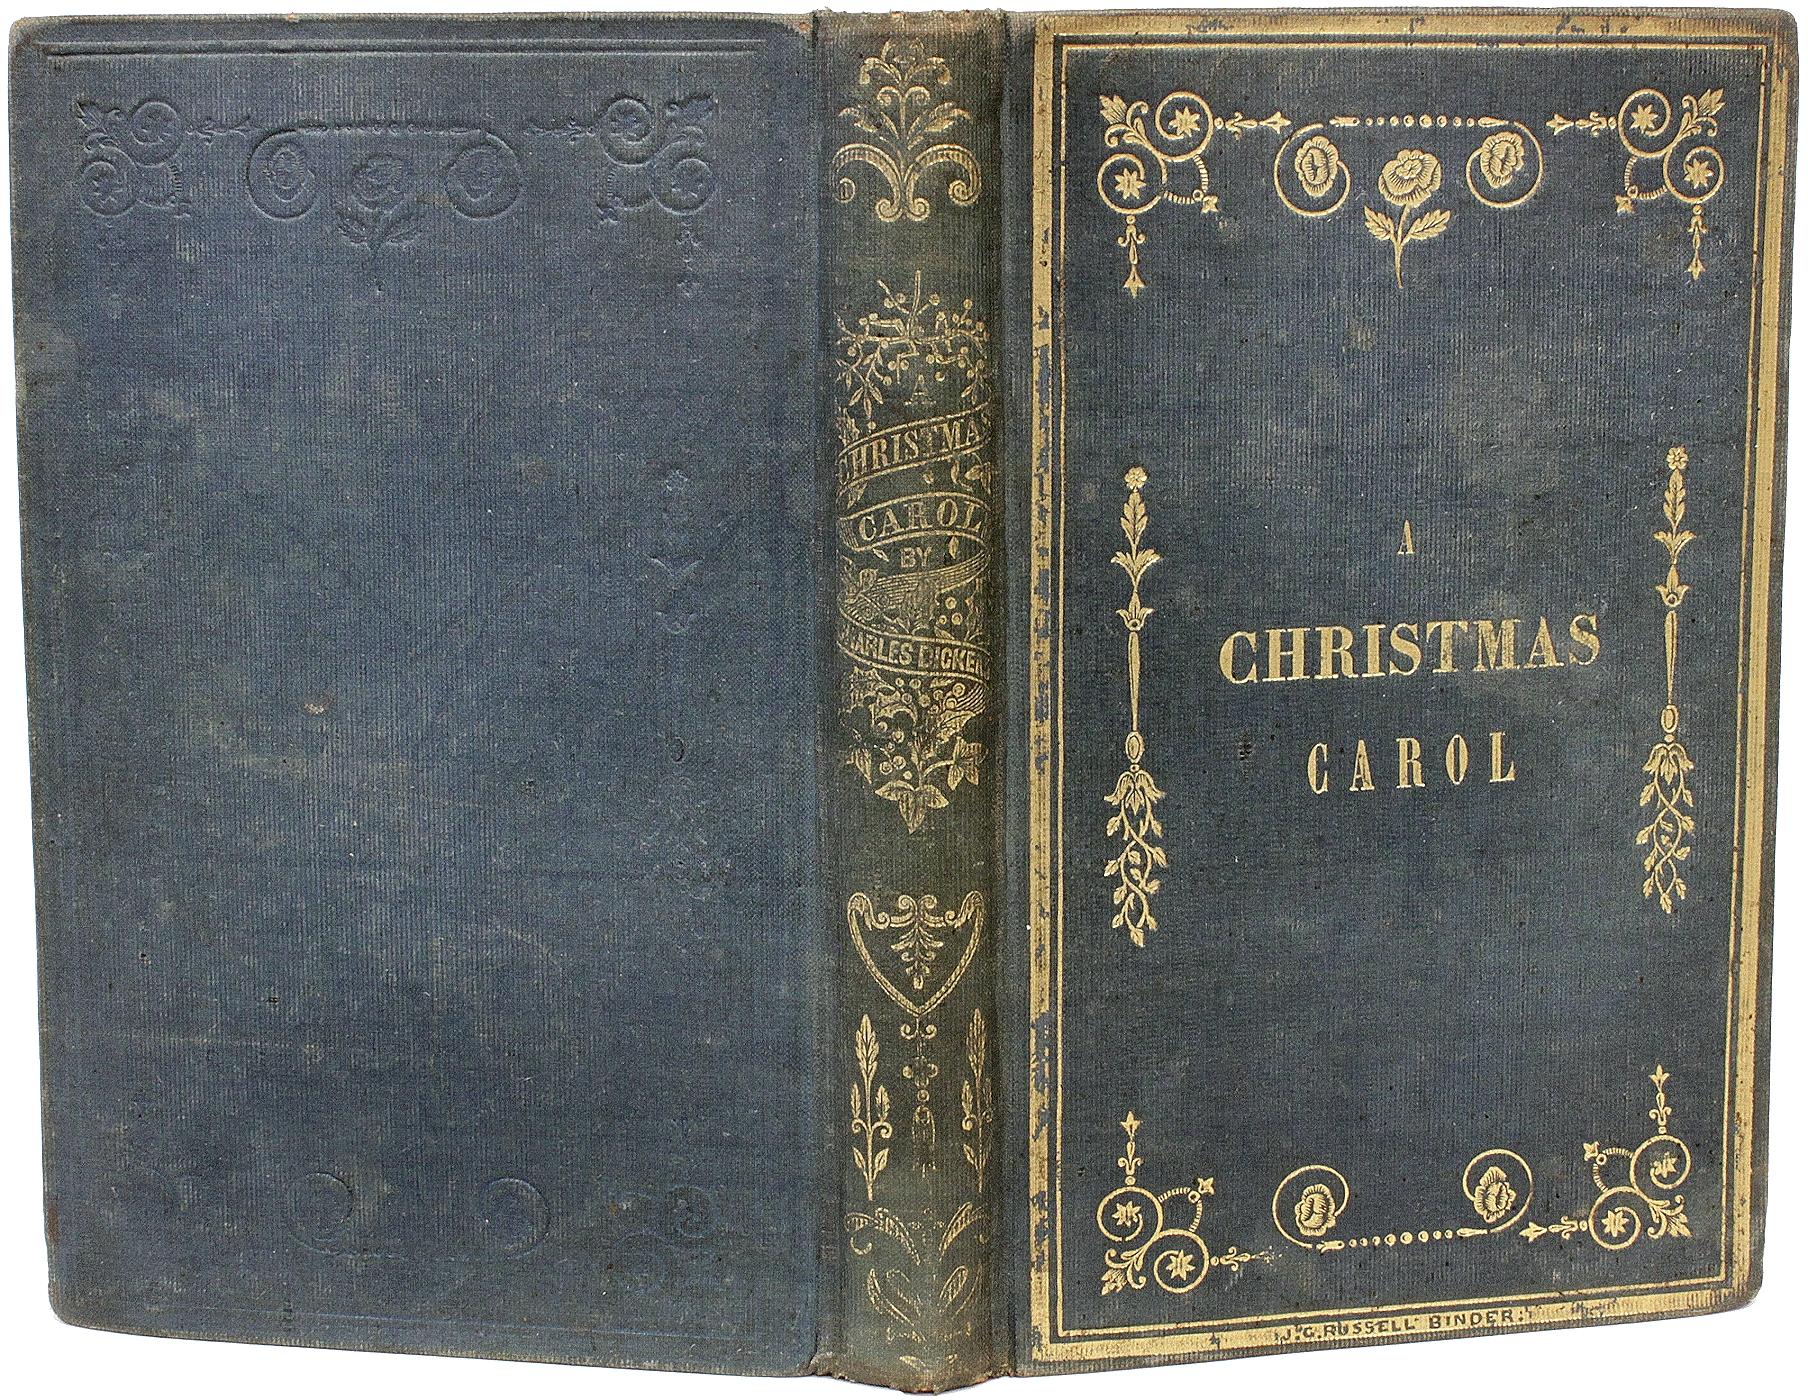 AUTHOR: DICKENS, Charles. 

TITLE: A Christmas Carol In Prose Being A Ghost Story of Christmas.

PUBLISHER: Philadelphia: Carey & Hart, 1844.

DESCRIPTION: FIRST AMERICAN EDITION IN THE RARE BLUE GIFT BINDING. 1 vol., 6-1/8